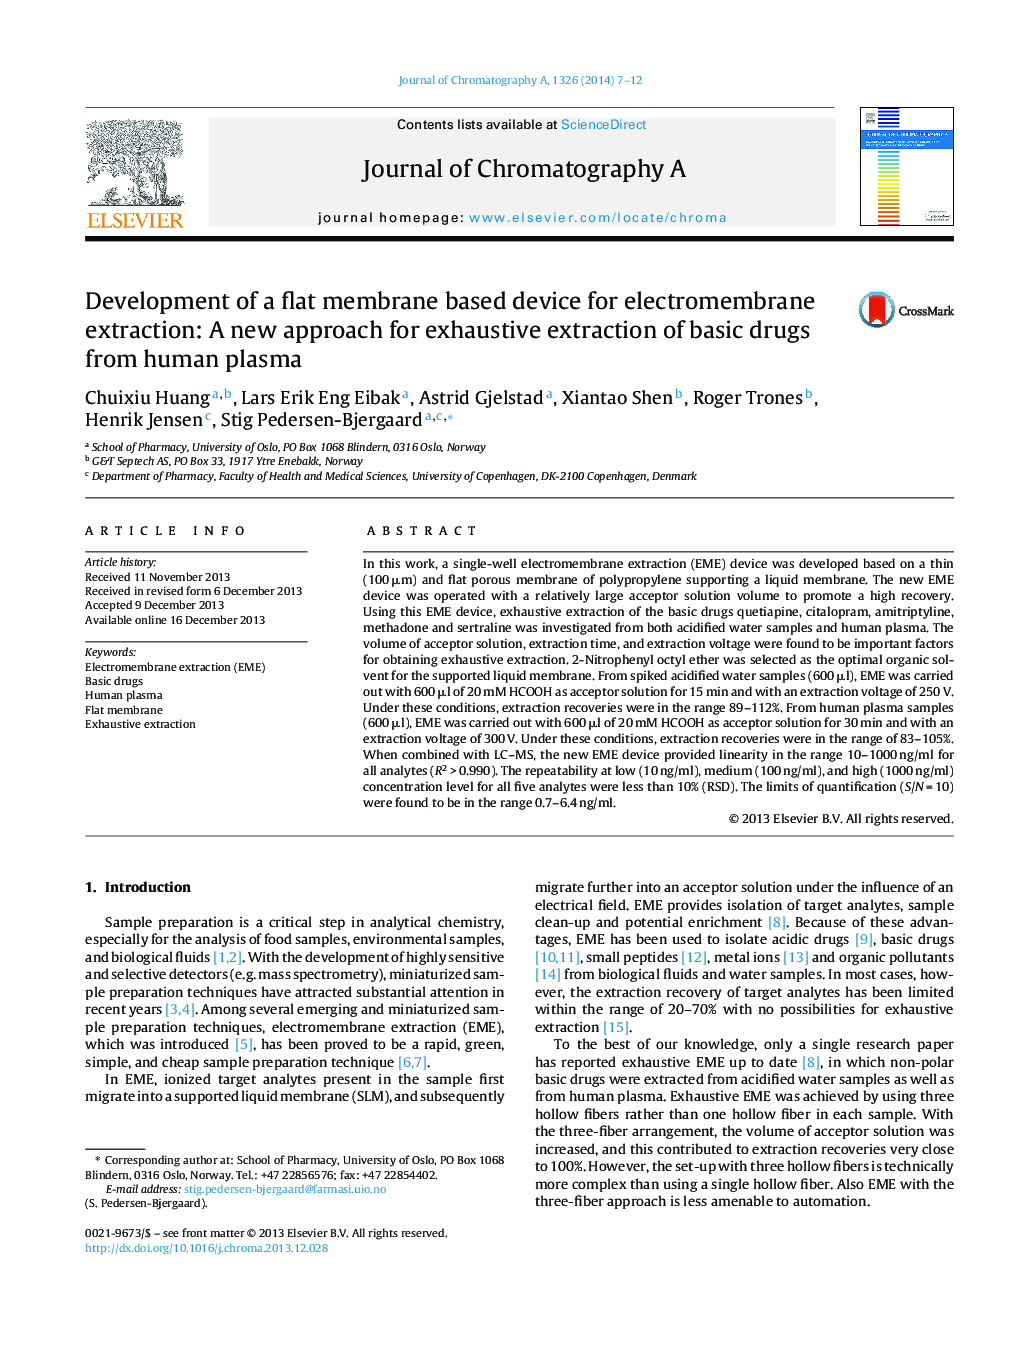 Development of a flat membrane based device for electromembrane extraction: A new approach for exhaustive extraction of basic drugs from human plasma